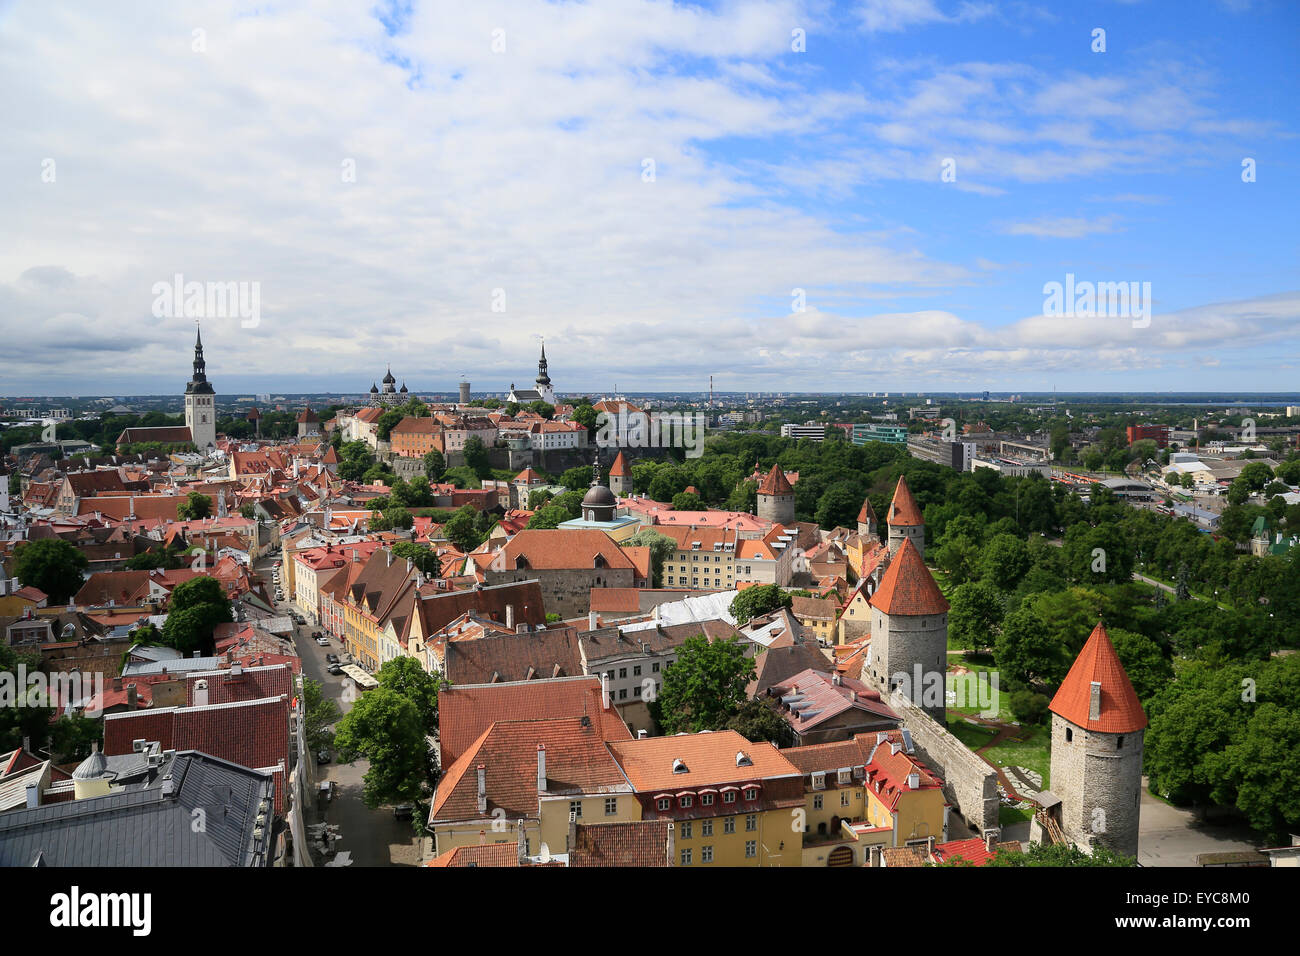 Upper Town with Alexander Nevsky Cathedral or Aleksander Nevski Katedraal and Toomkirik cathedral, Lower Town with St. Nicholas' Stock Photo